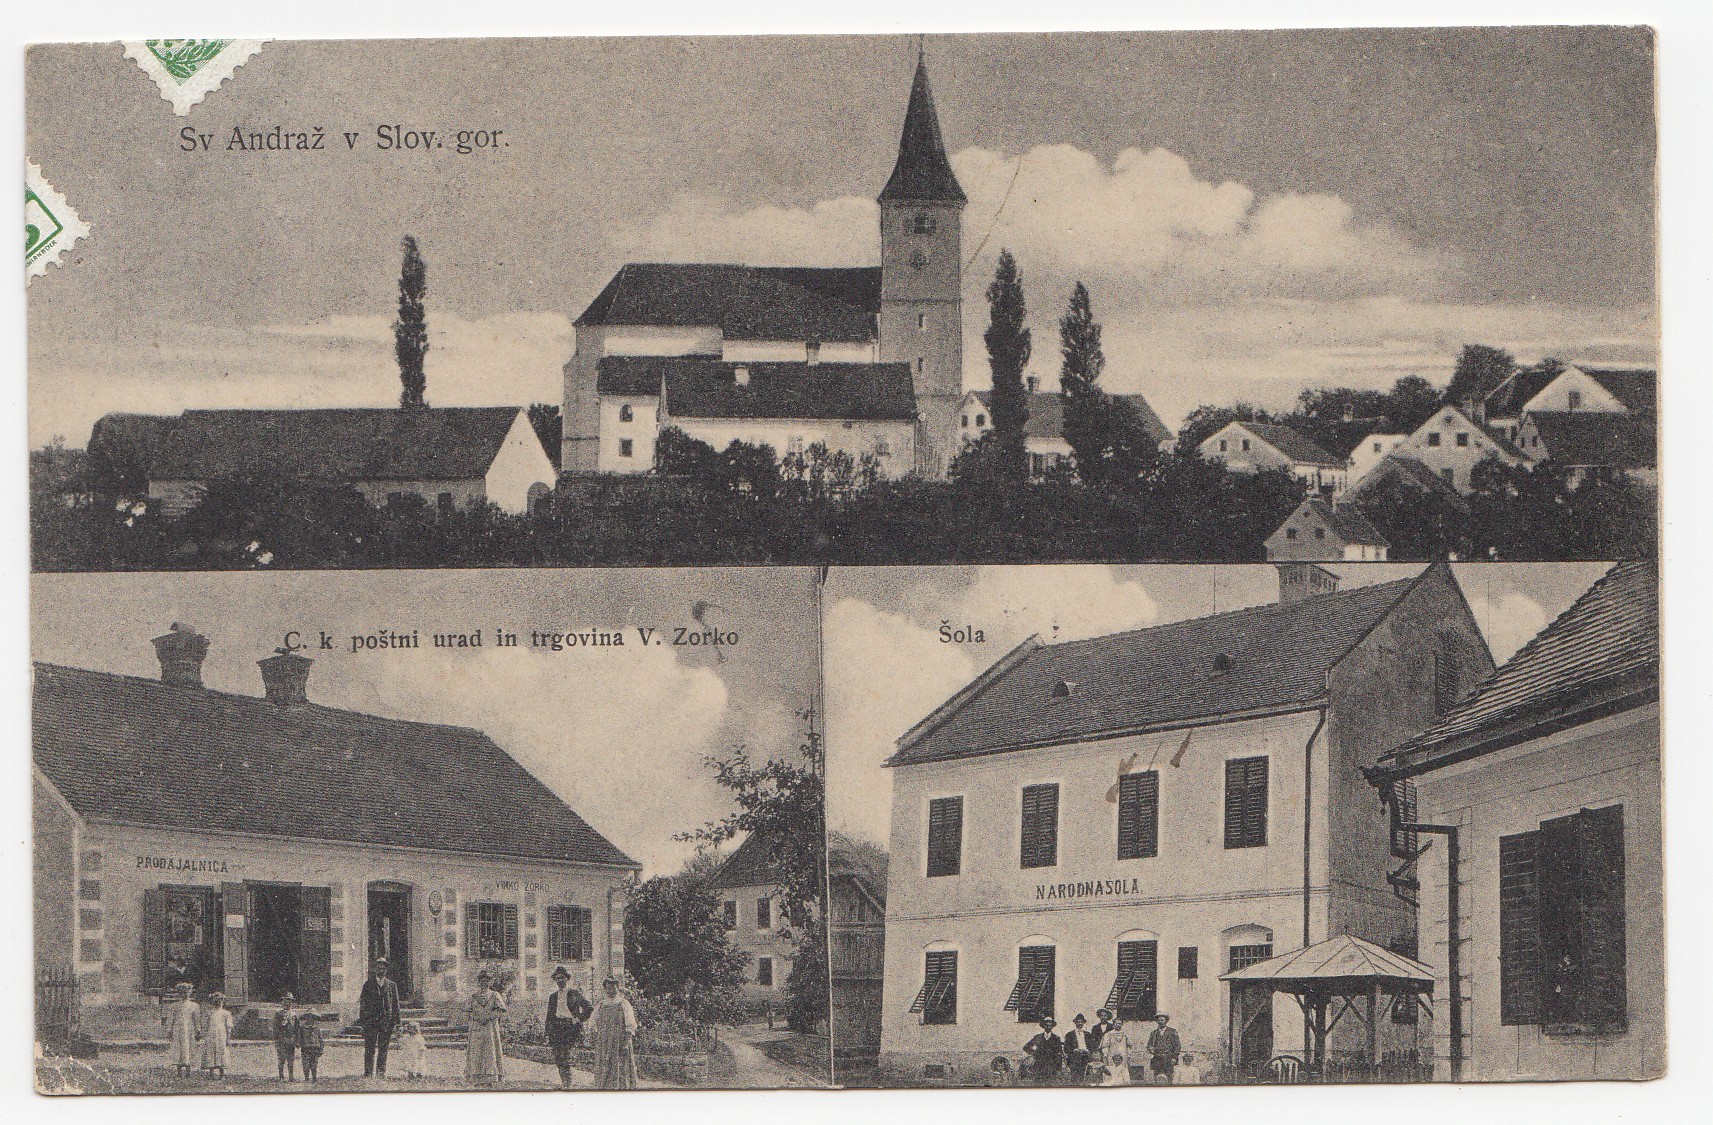 Figure 5 and 6: , producer , sent between 1910 and 1914 from Sv. Andraž/St. Andrä (the today’s Vitomarci) to Ljubljana/Laibach.